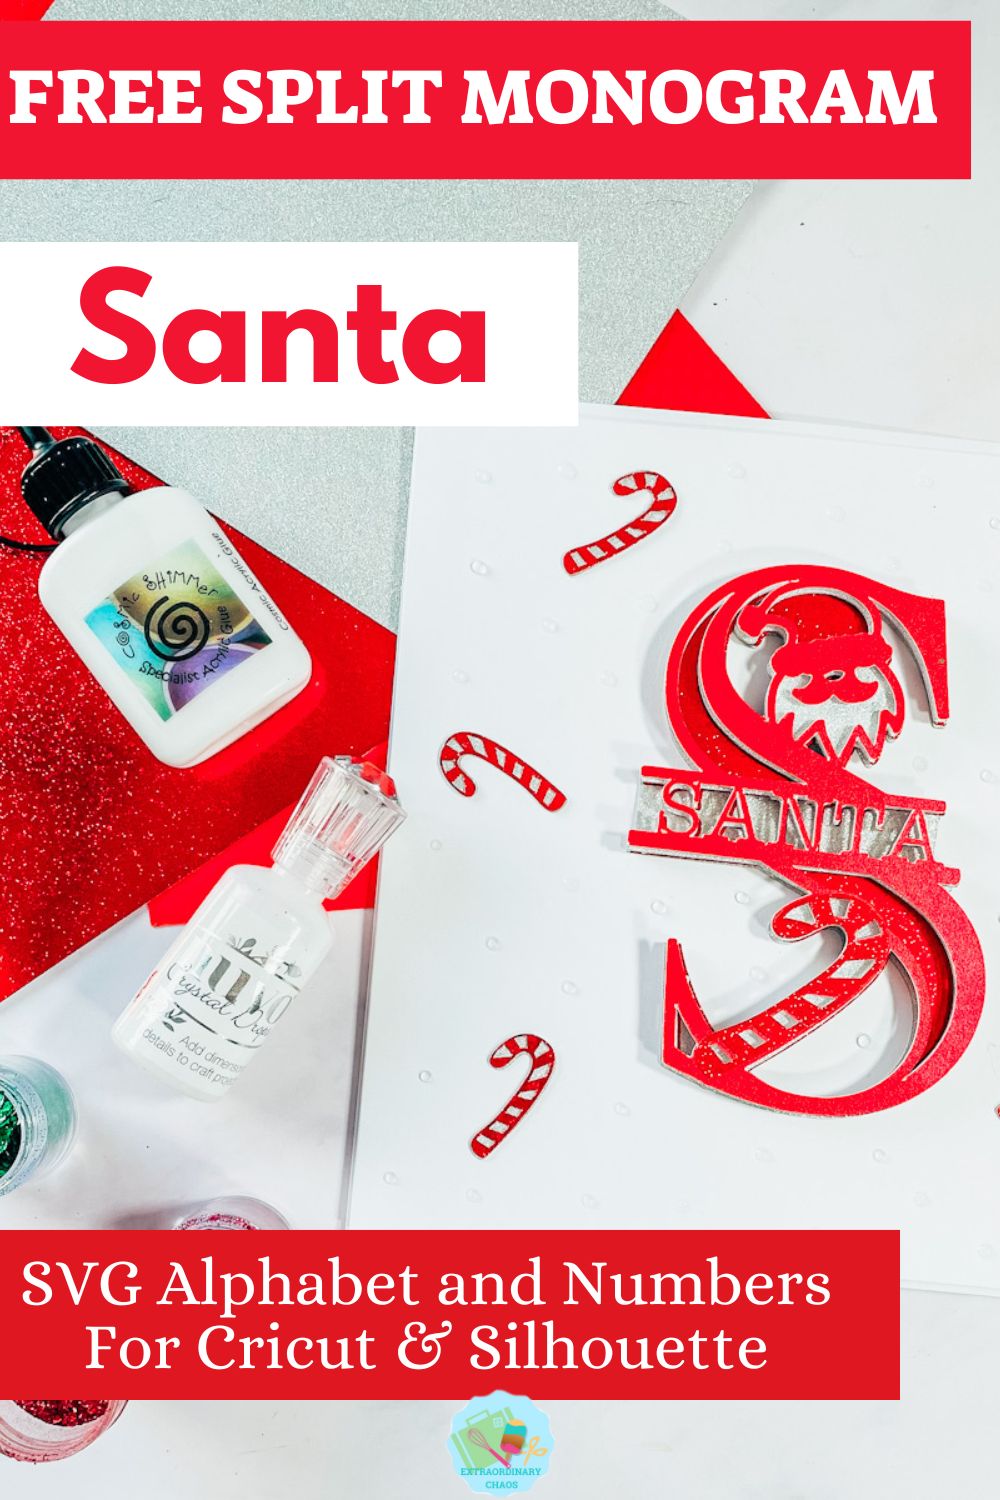 Santa Split Monogram Alphabet and Numbers For Cricut and Silhouette